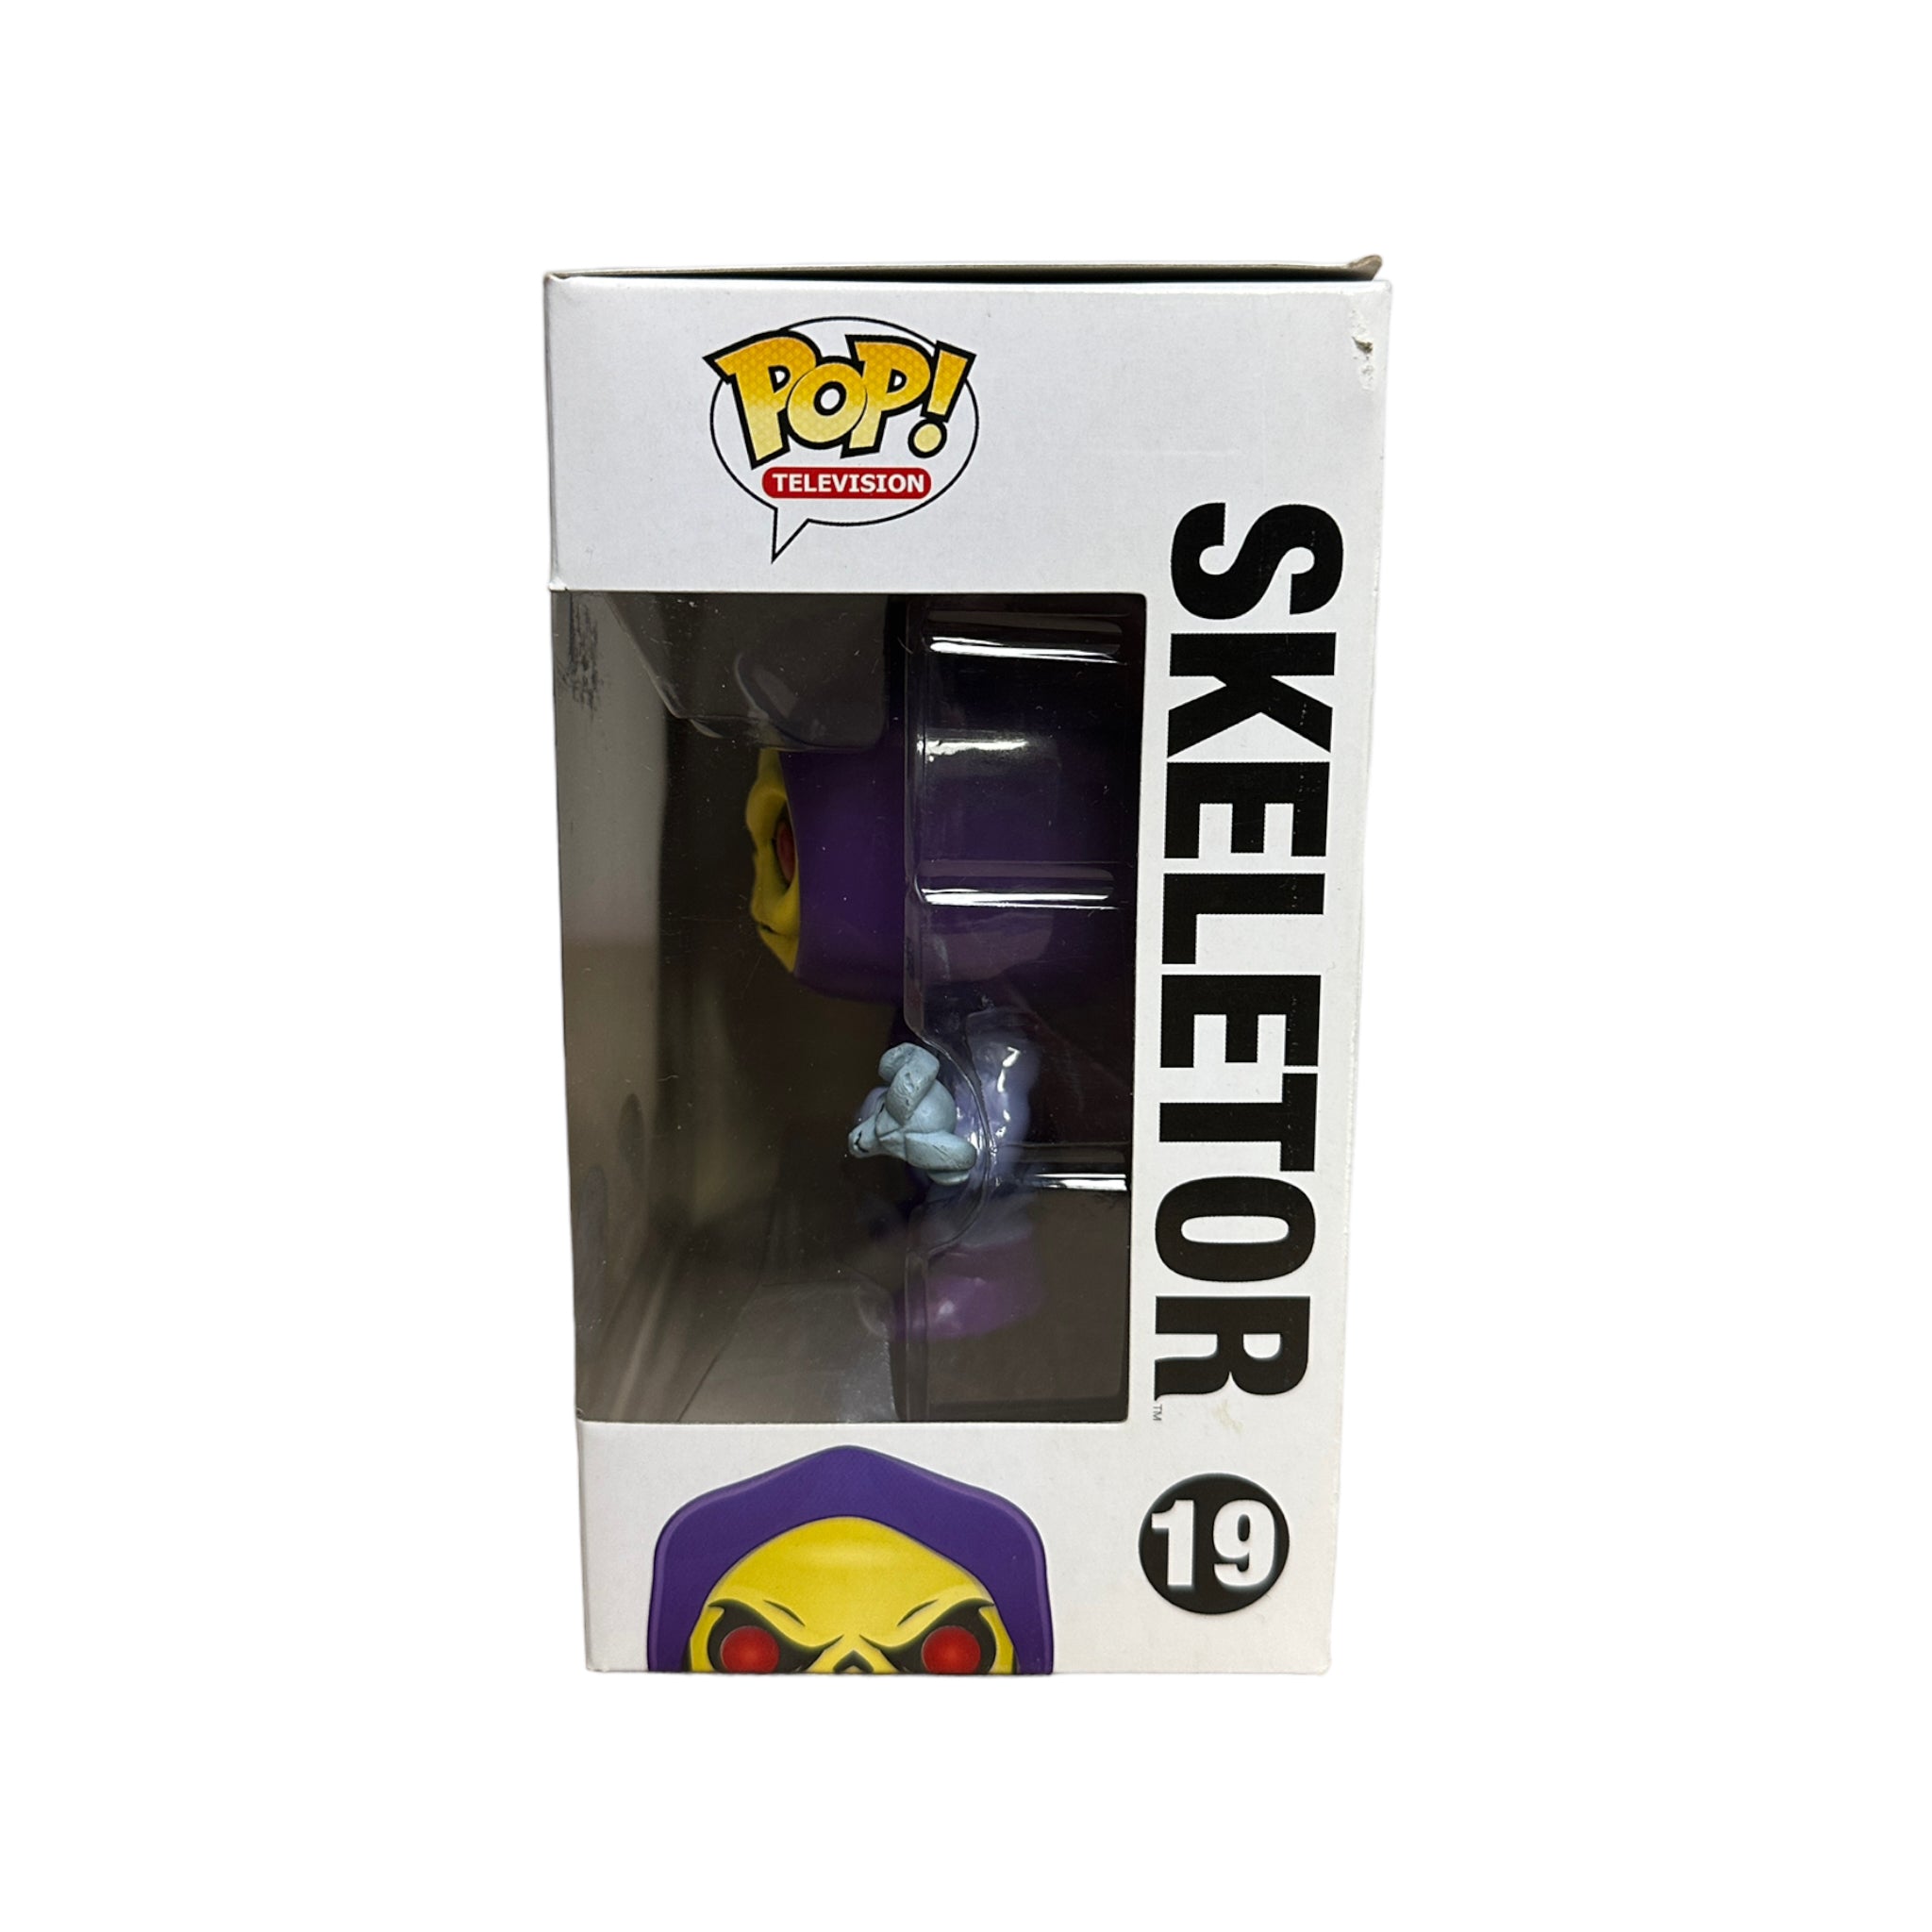 Skeletor #19 (Glows in the Dark) Funko Pop! - Masters of The Universe - Gemini Collectibles Exclusive LE480 Pcs - Condition 6.5/10